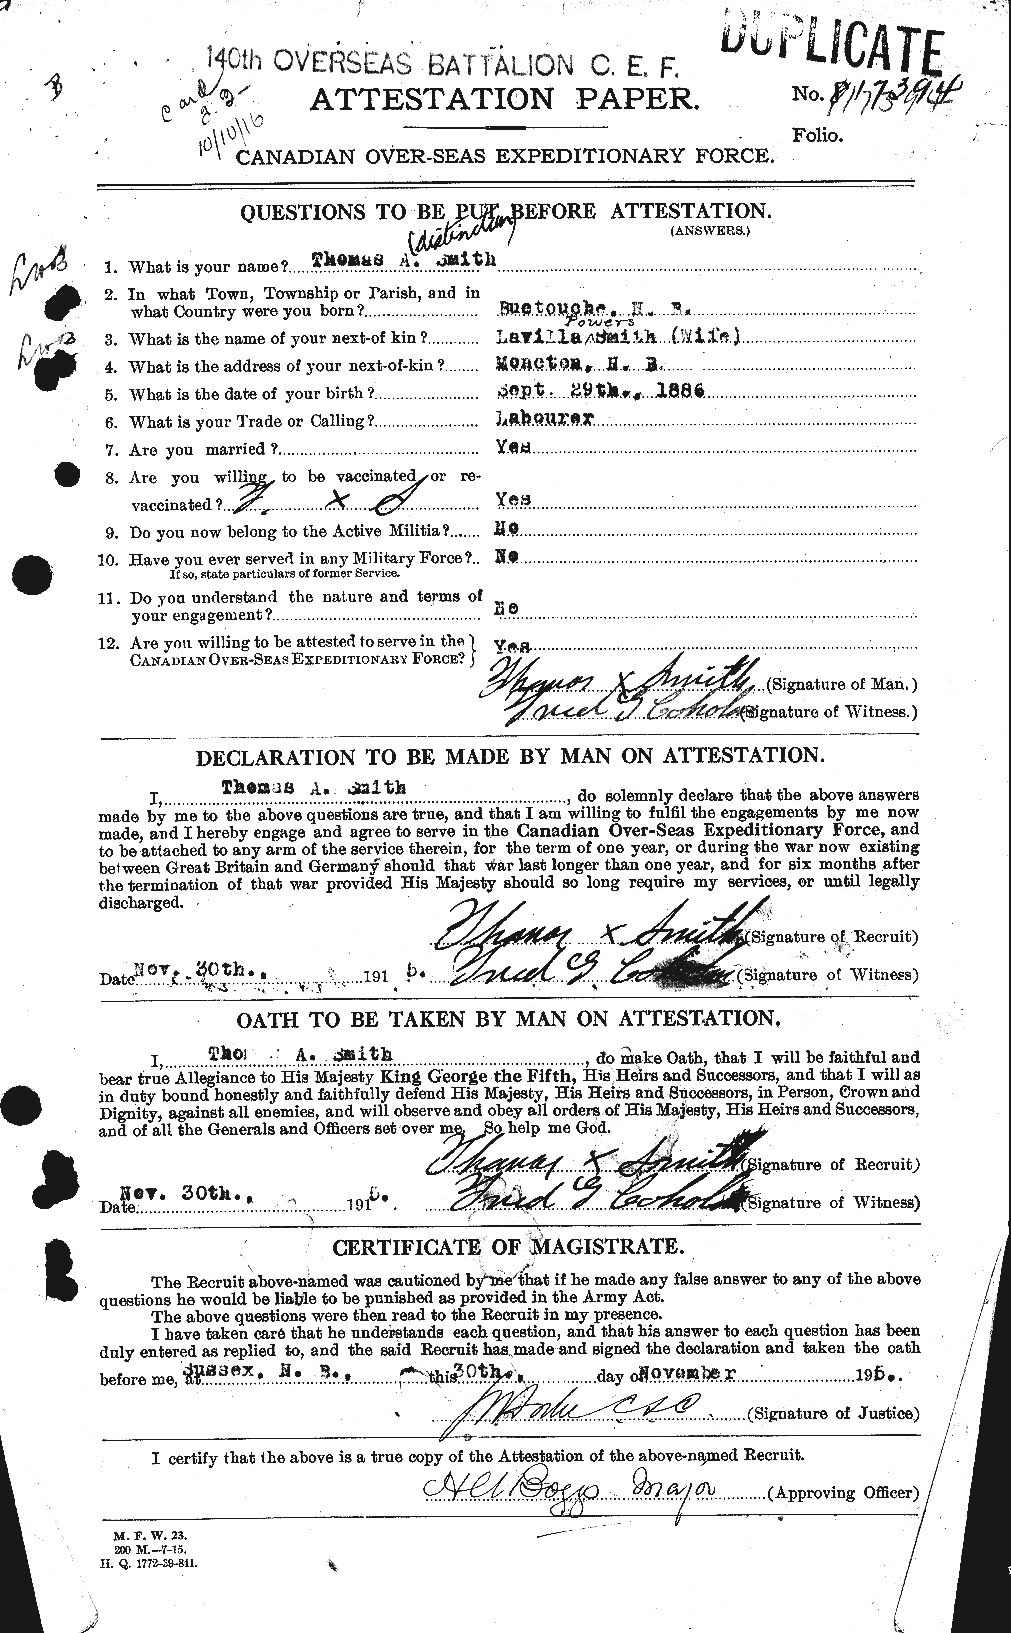 Personnel Records of the First World War - CEF 106674a